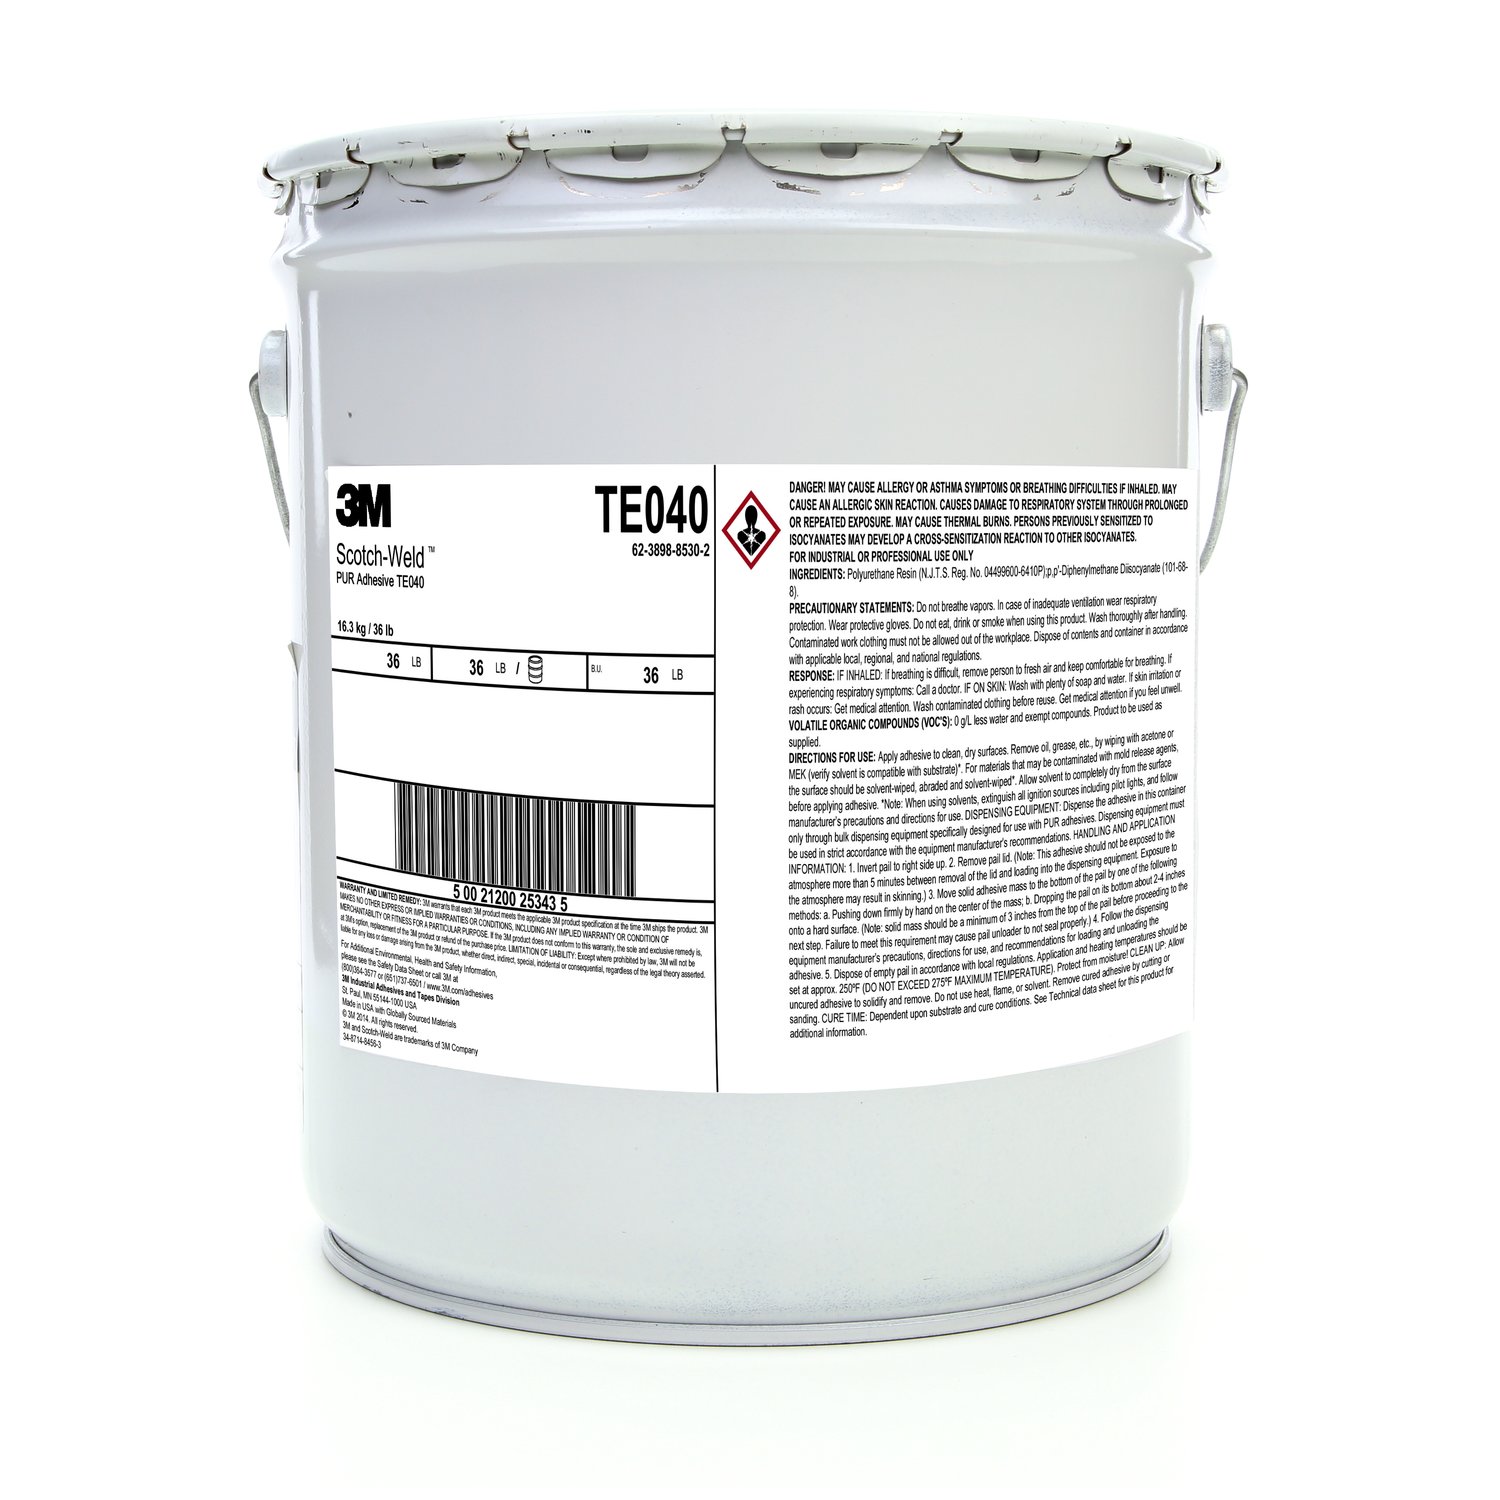 https://www.e-aircraftsupply.com/ItemImages/13/1139883E_3m-scotch-weld-pur-easy-adhesive-te040-white-off-white.jpg